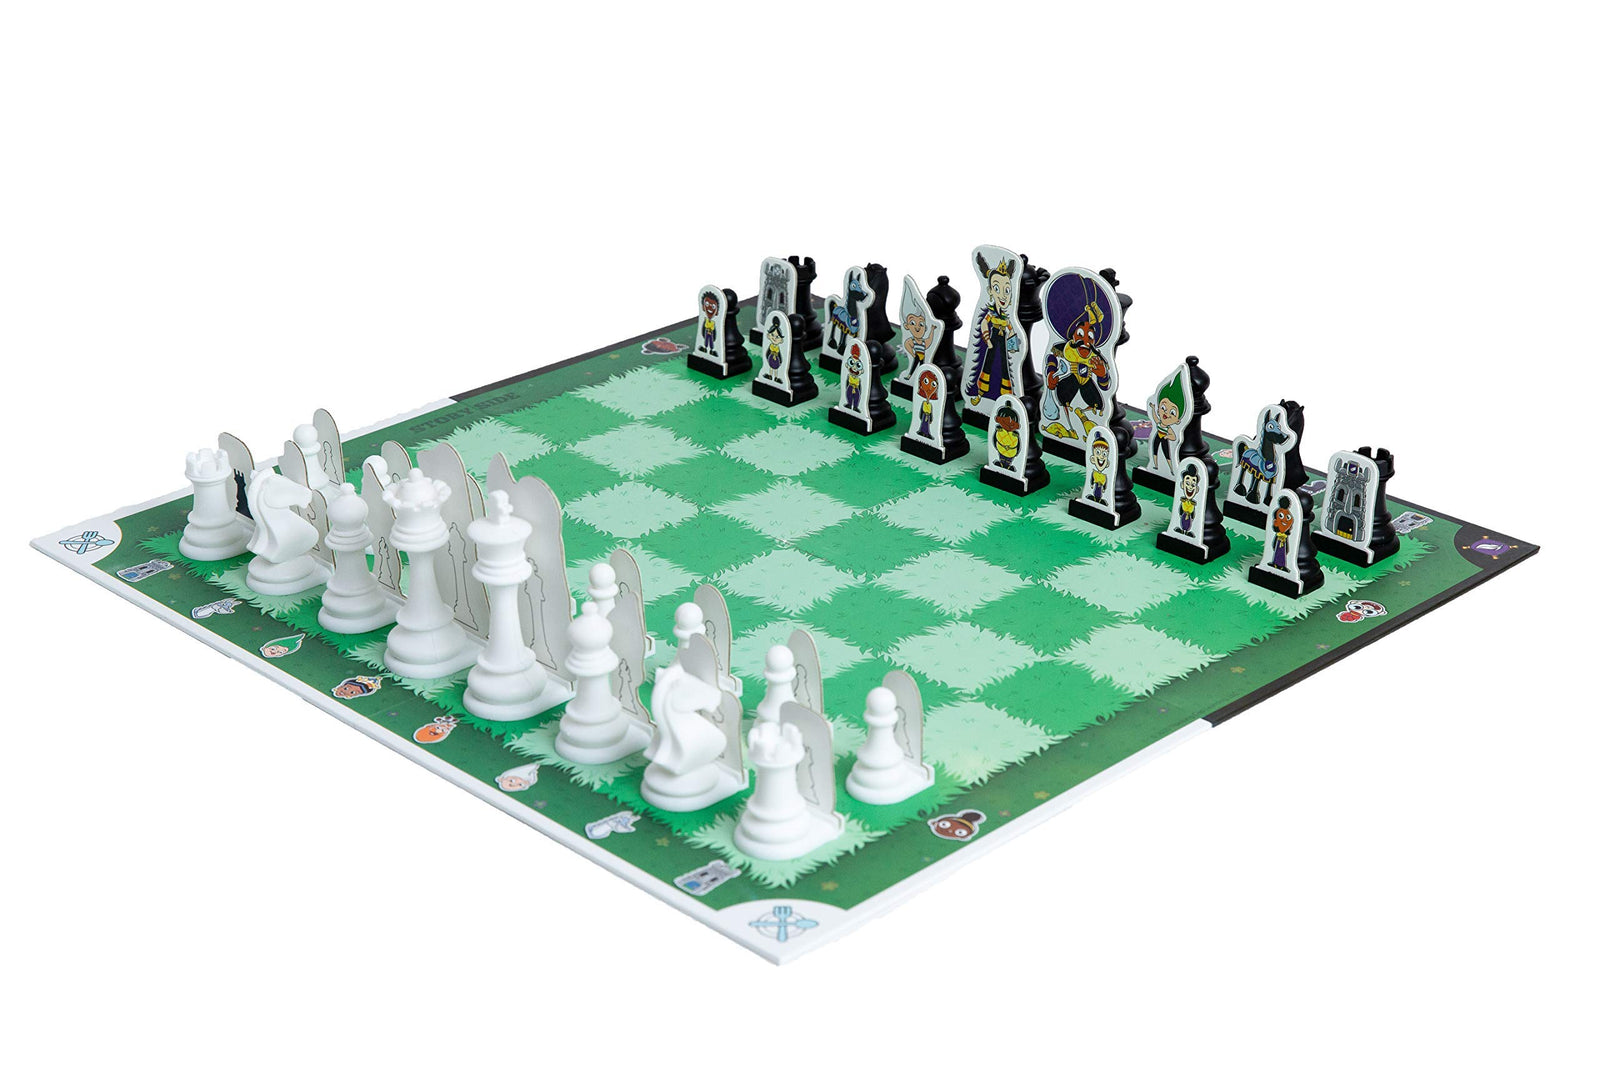 Story Time Chess - 2021 People’s Choice Toy of The Year Award Winner - Read a Story. Play Chess. Ages 3-103